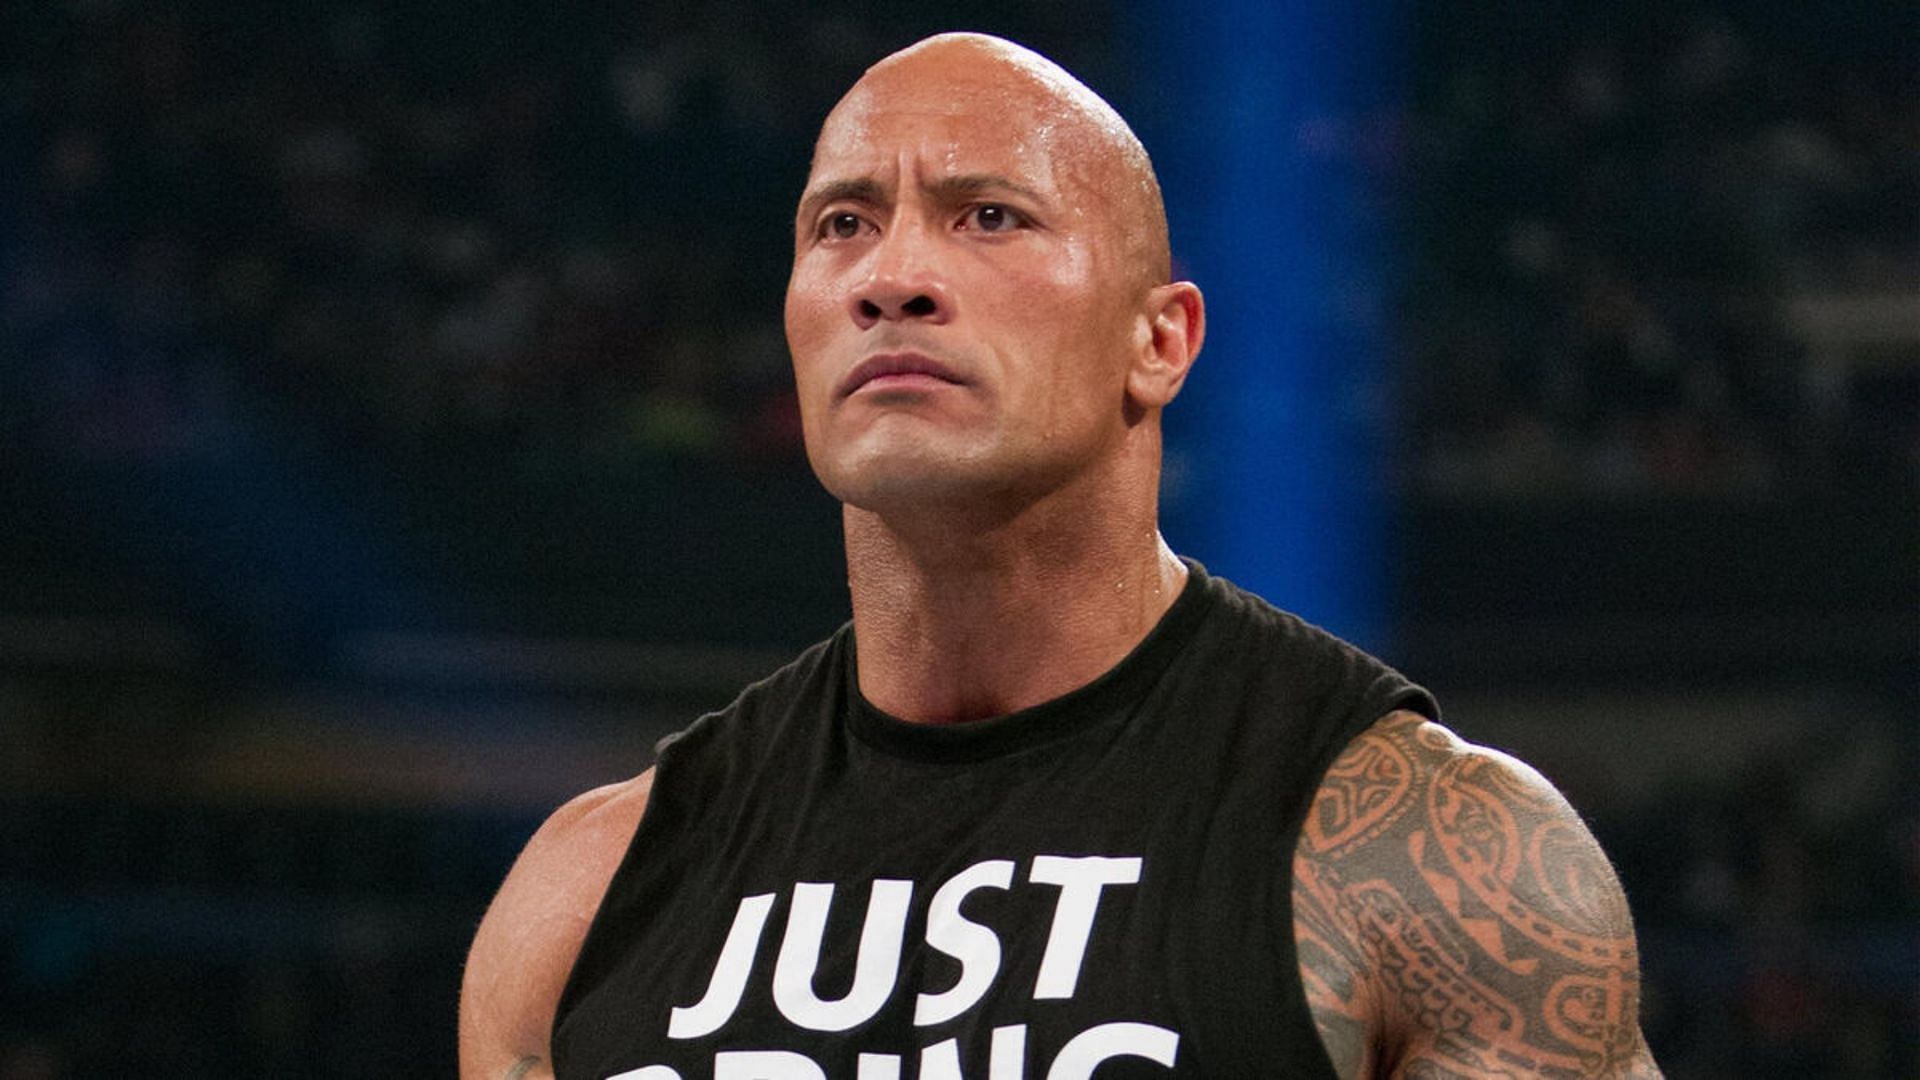 Will The Rock compete at WWE WrestleMania 40?